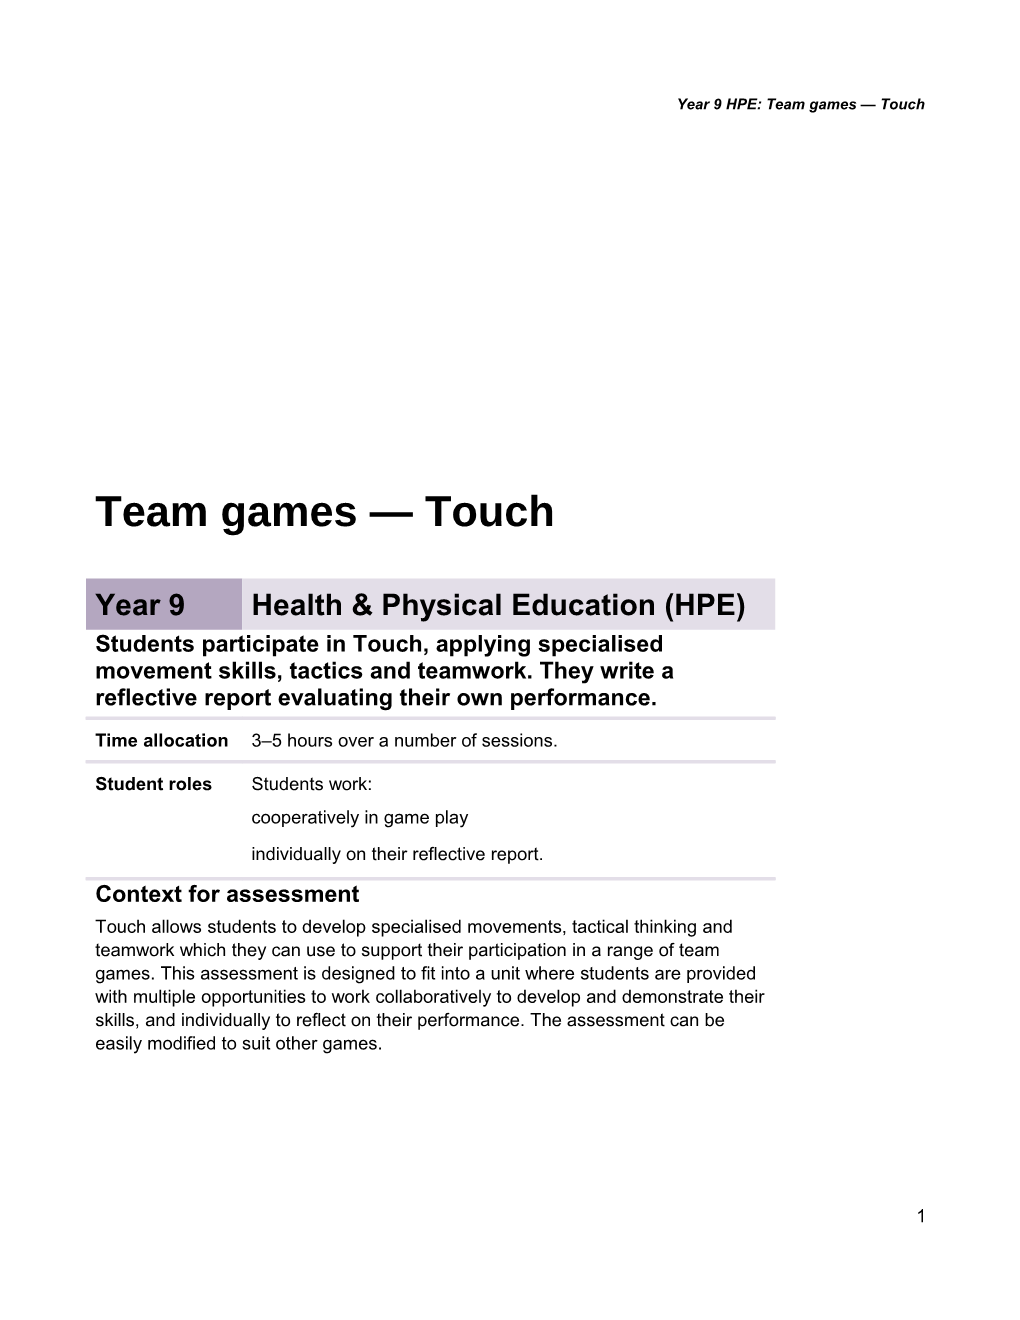 Year 9 Health & Physical Education Assessment Teacher Guidelines Team Games - Touch Queensland